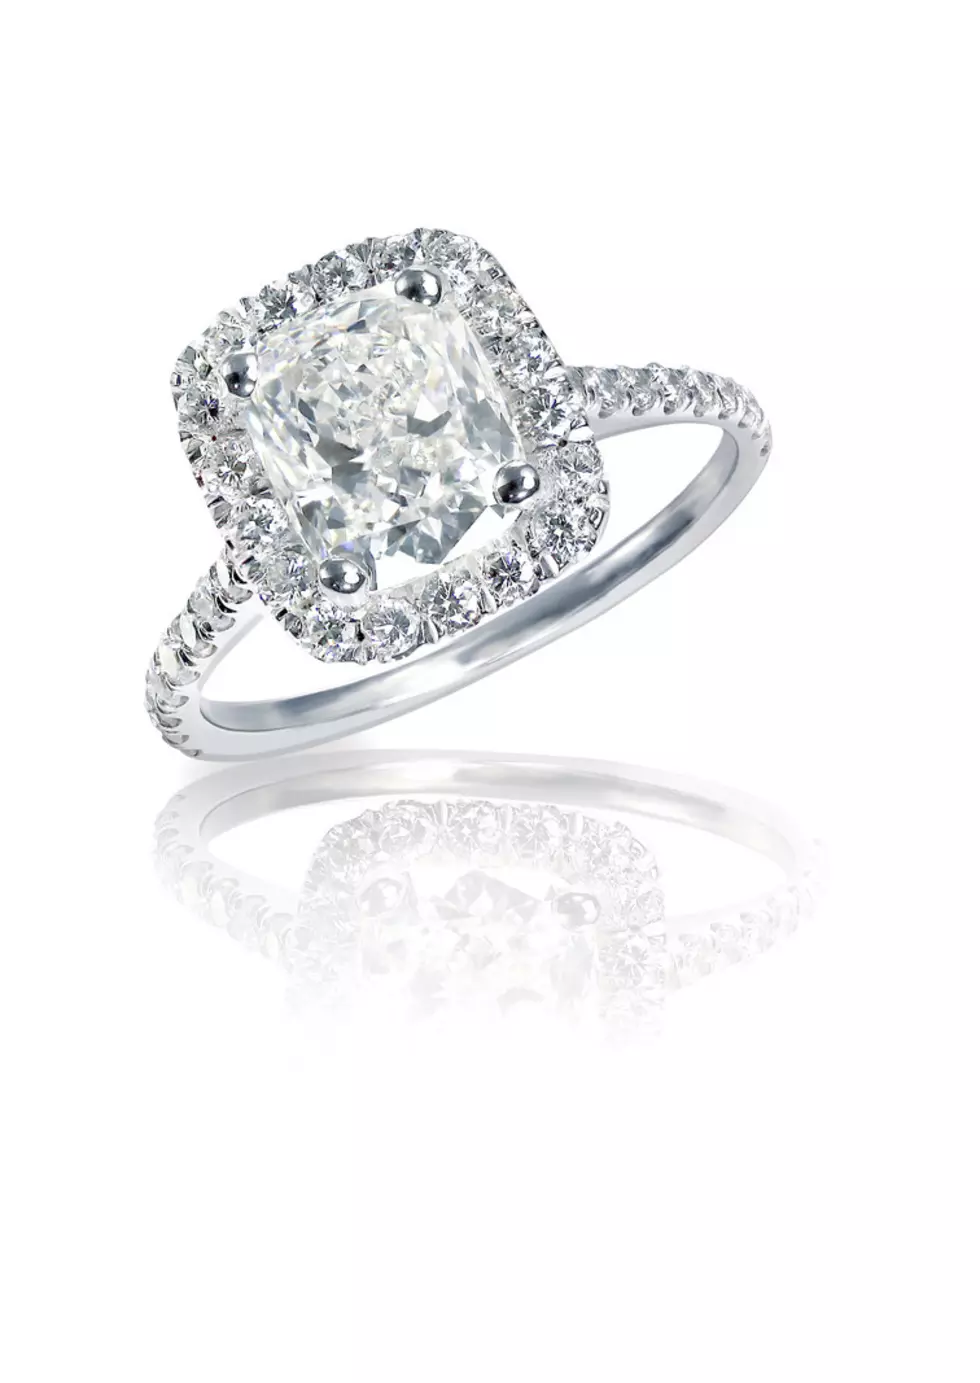 Ready To Propose? Let’s Explore Diamond Cuts & Styles [GALLERY]